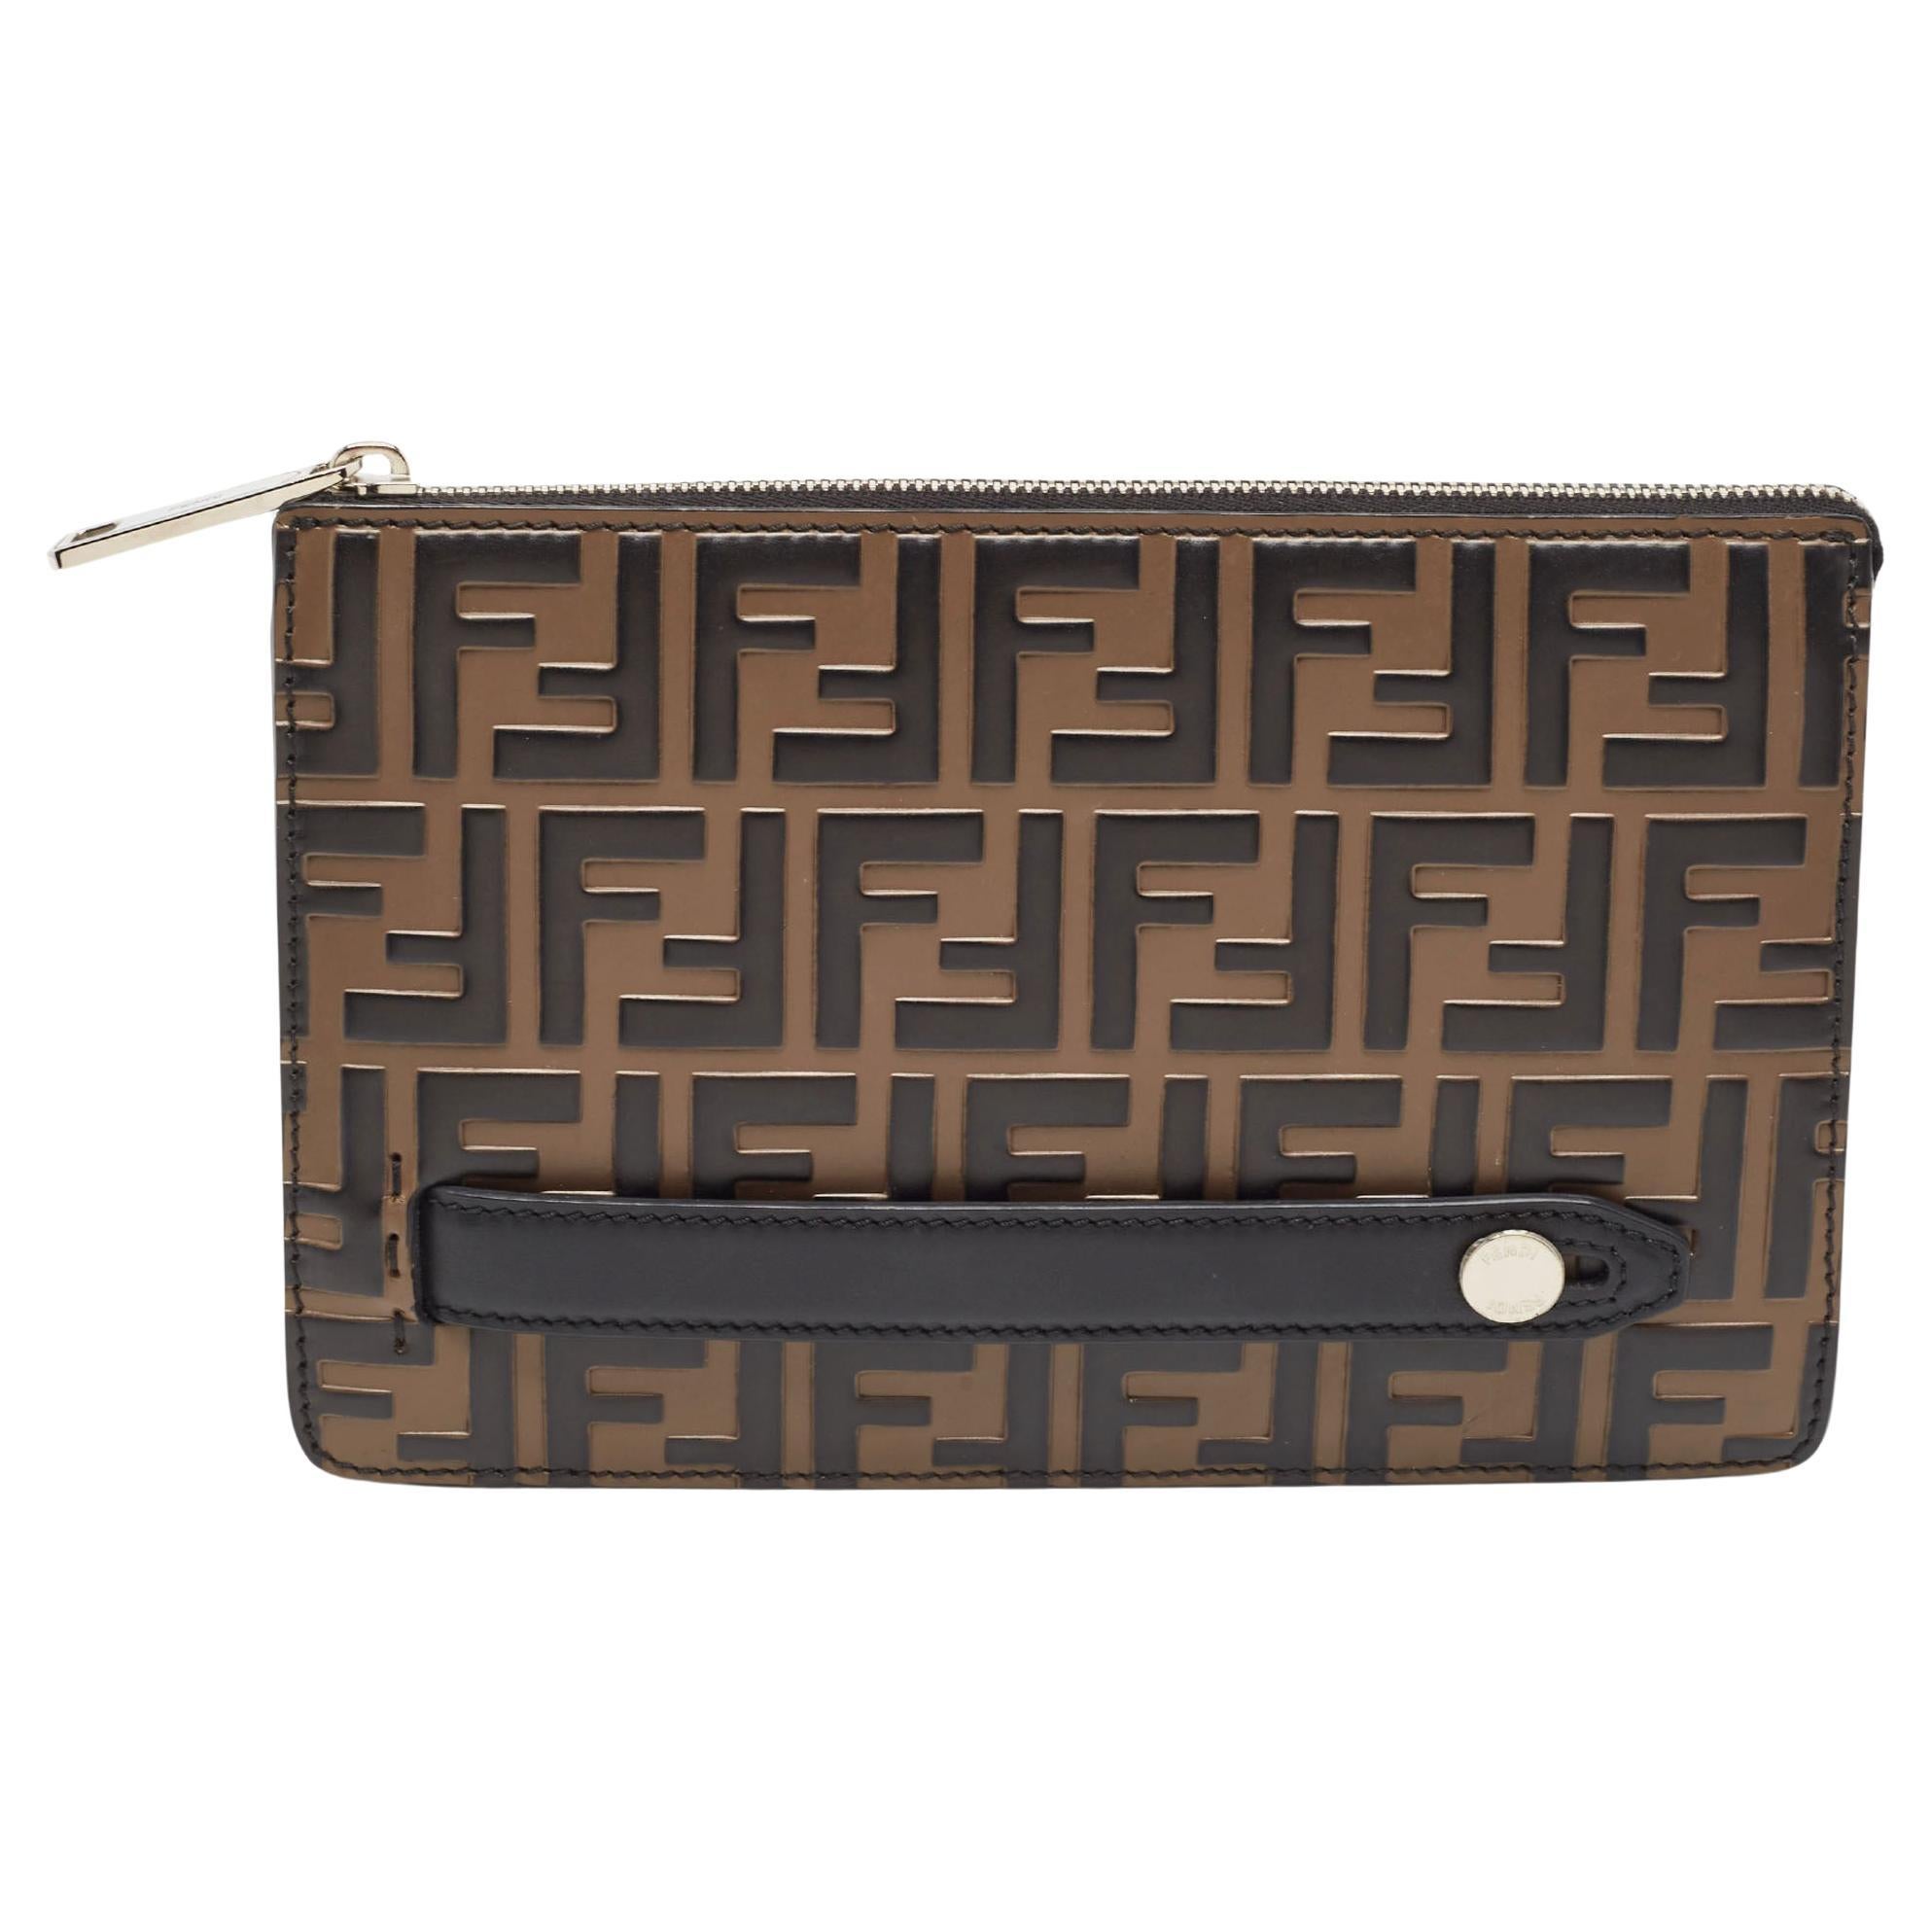 Fendi Black/Tobacco Zucca Embossed Leather Zip Pouch